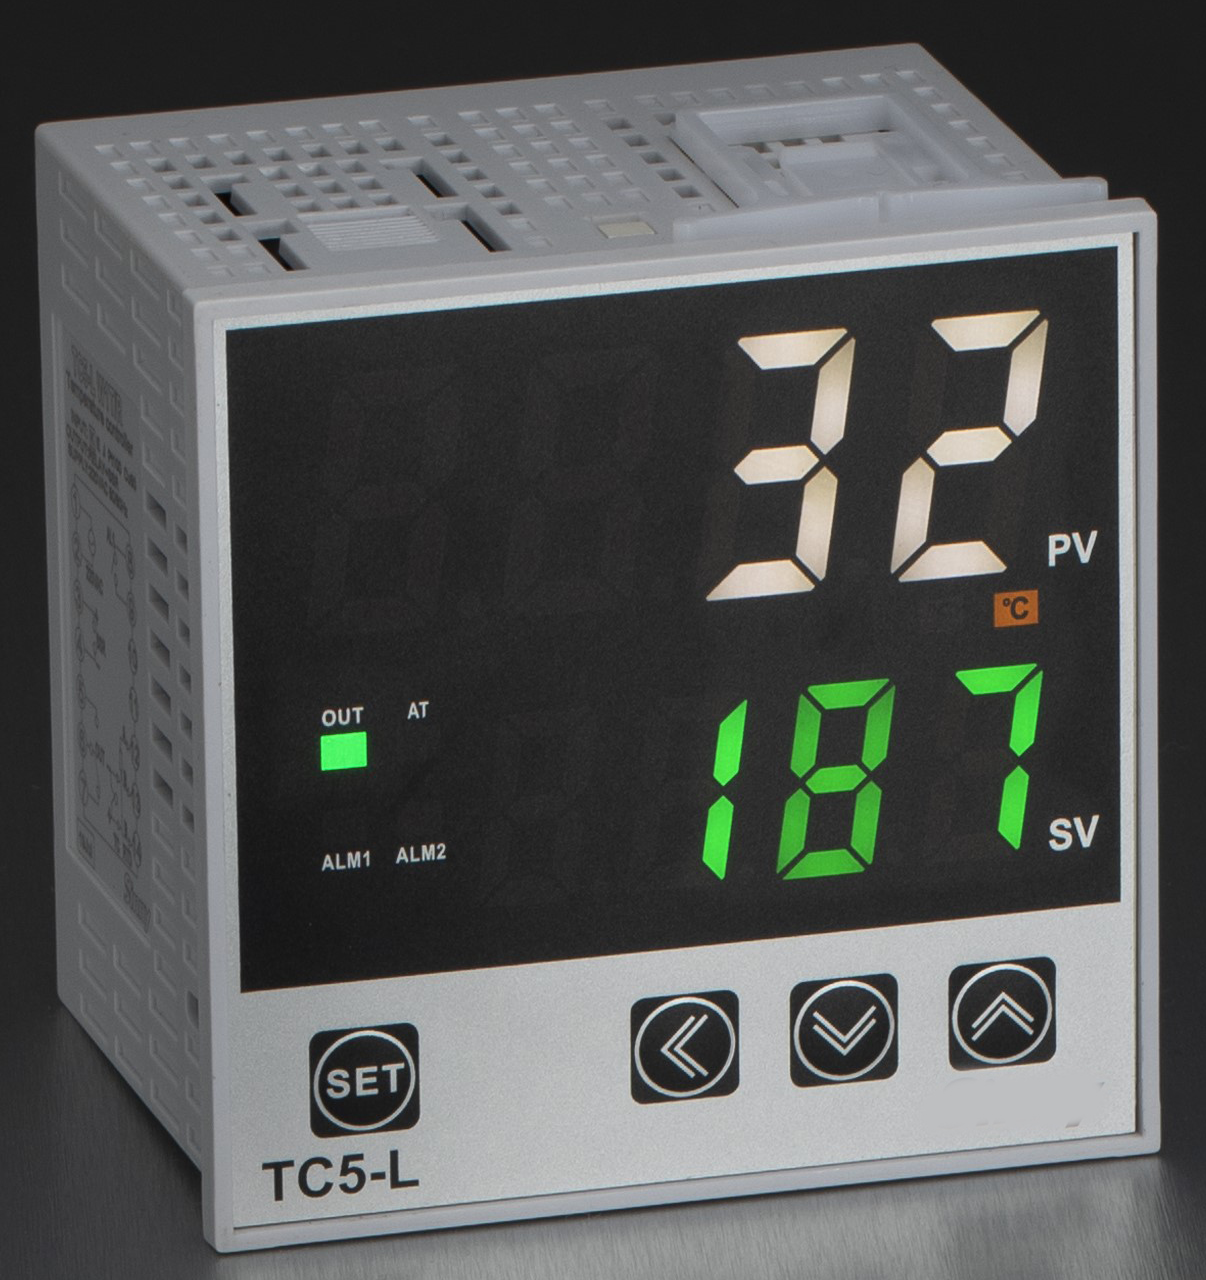 FC5-M-1A-1-G-4-C PID Controller, 24VDC with 1 Alarm, RS485, E,J,N,T,S,R,B Thermocouple, Linear Current/Voltage and  PT100/Cu20 RTD Input, 72x72mm,4-20mA Output